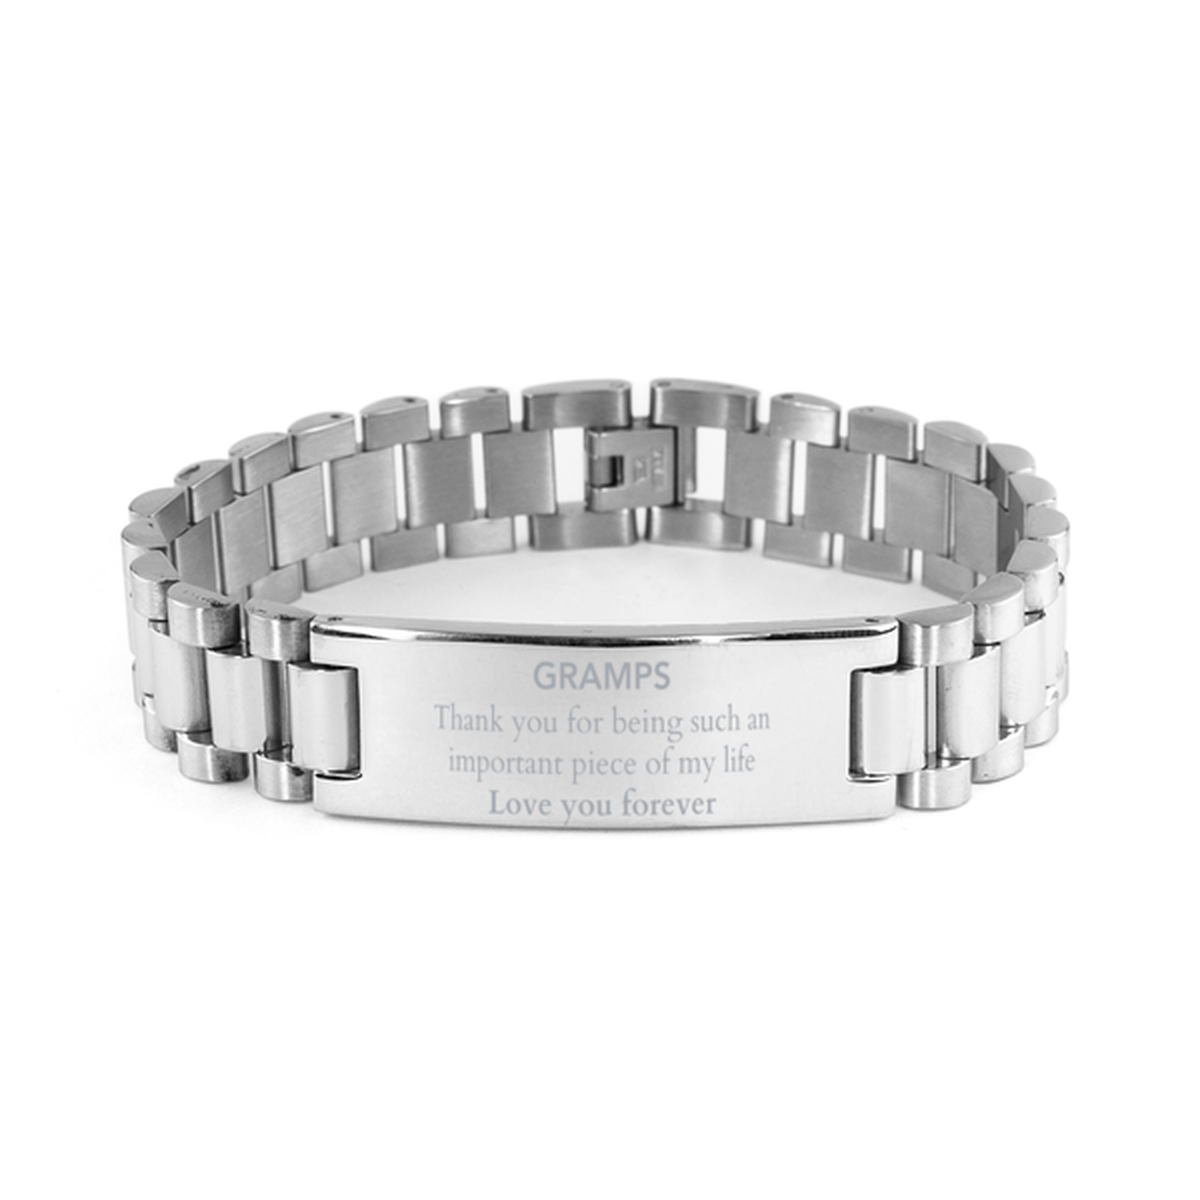 Appropriate Gramps Ladder Stainless Steel Bracelet Epic Birthday Gifts for Gramps Thank you for being such an important piece of my life Gramps Christmas Mothers Fathers Day